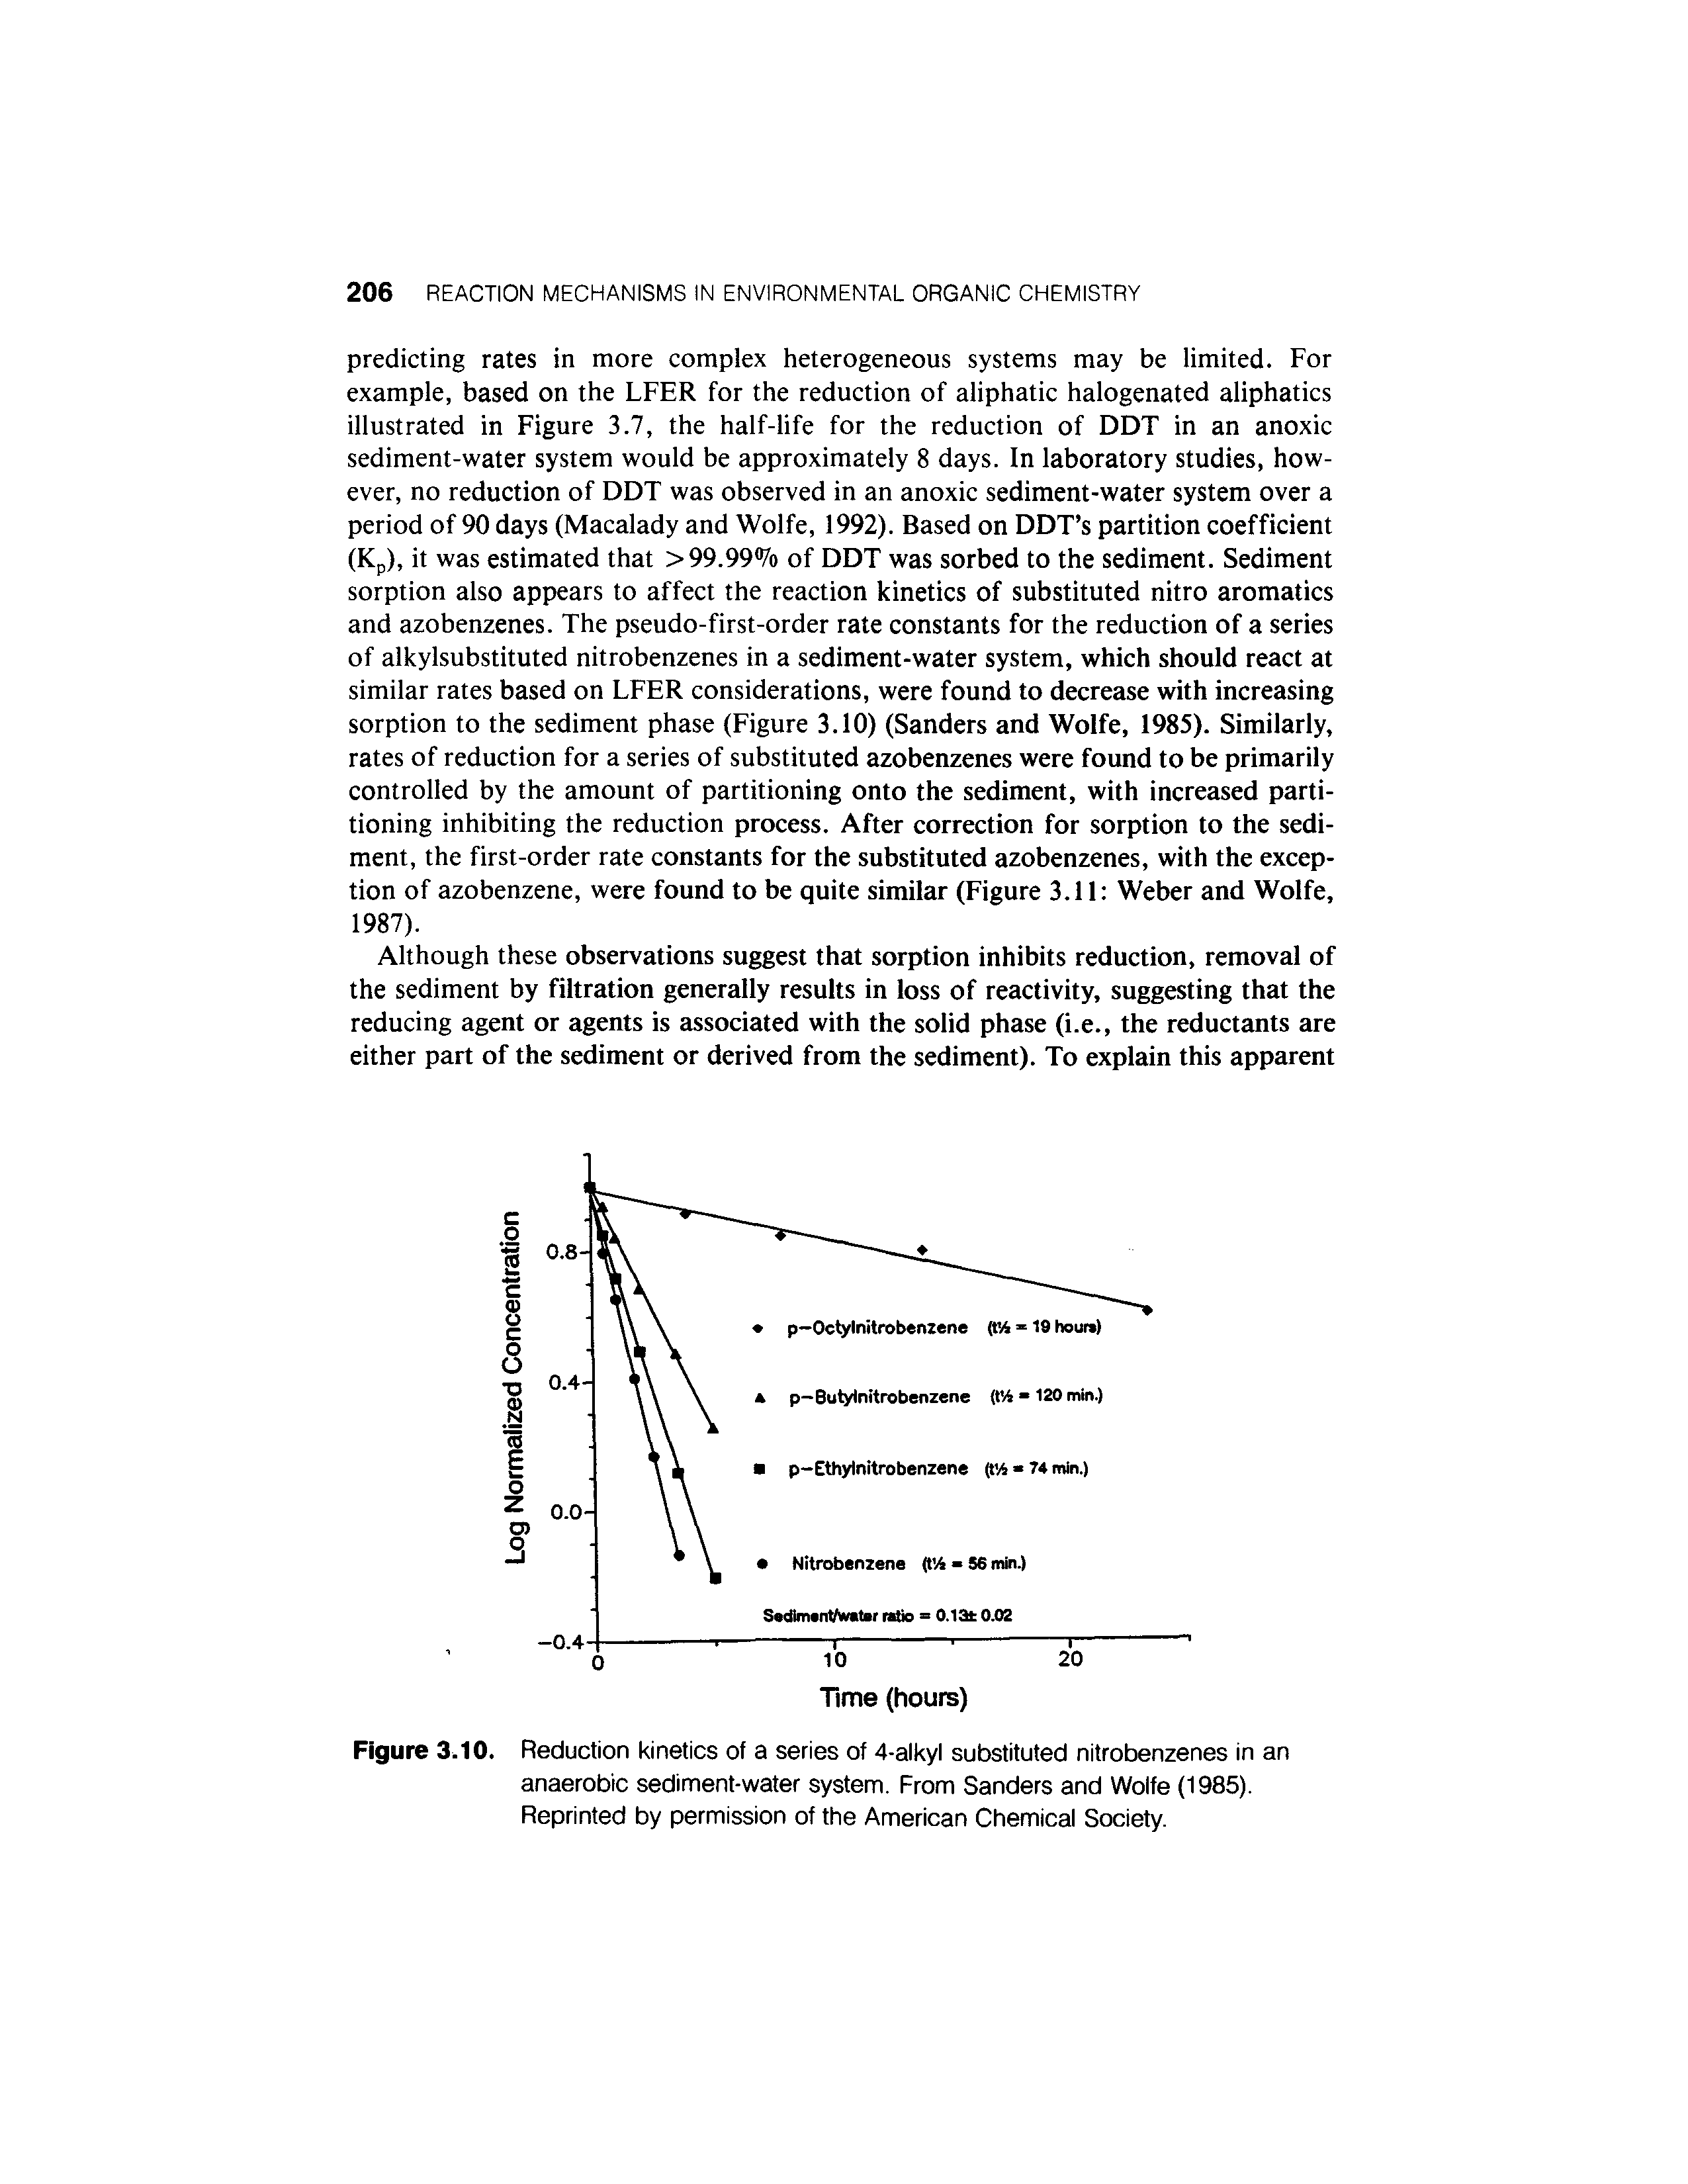 Figure 3.10. Reduction kinetics of a series of 4-alkyl substituted nitrobenzenes in an anaerobic sediment-water system. From Sanders and Wolfe (1985). Reprinted by permission of the American Chemical Society.